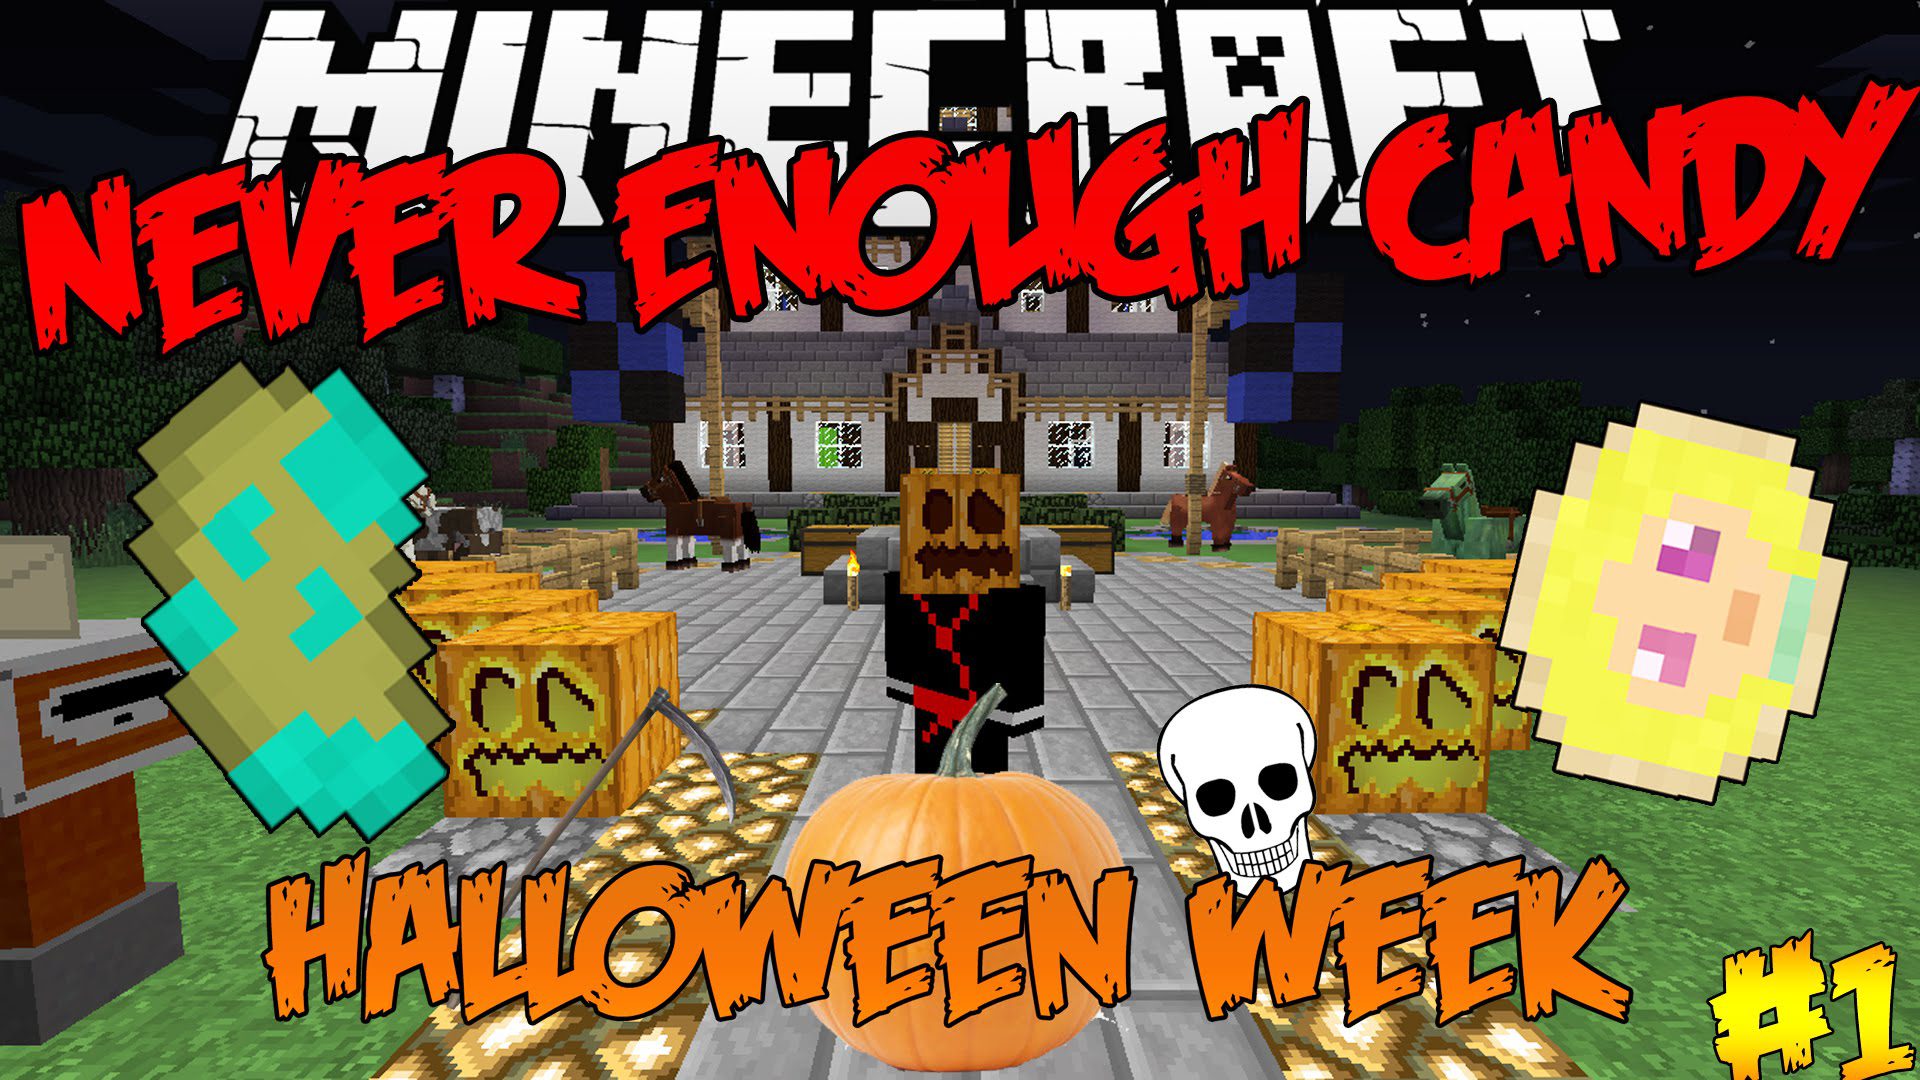 Never Enough Candy Mod 1.12.2/1.7.10  Download